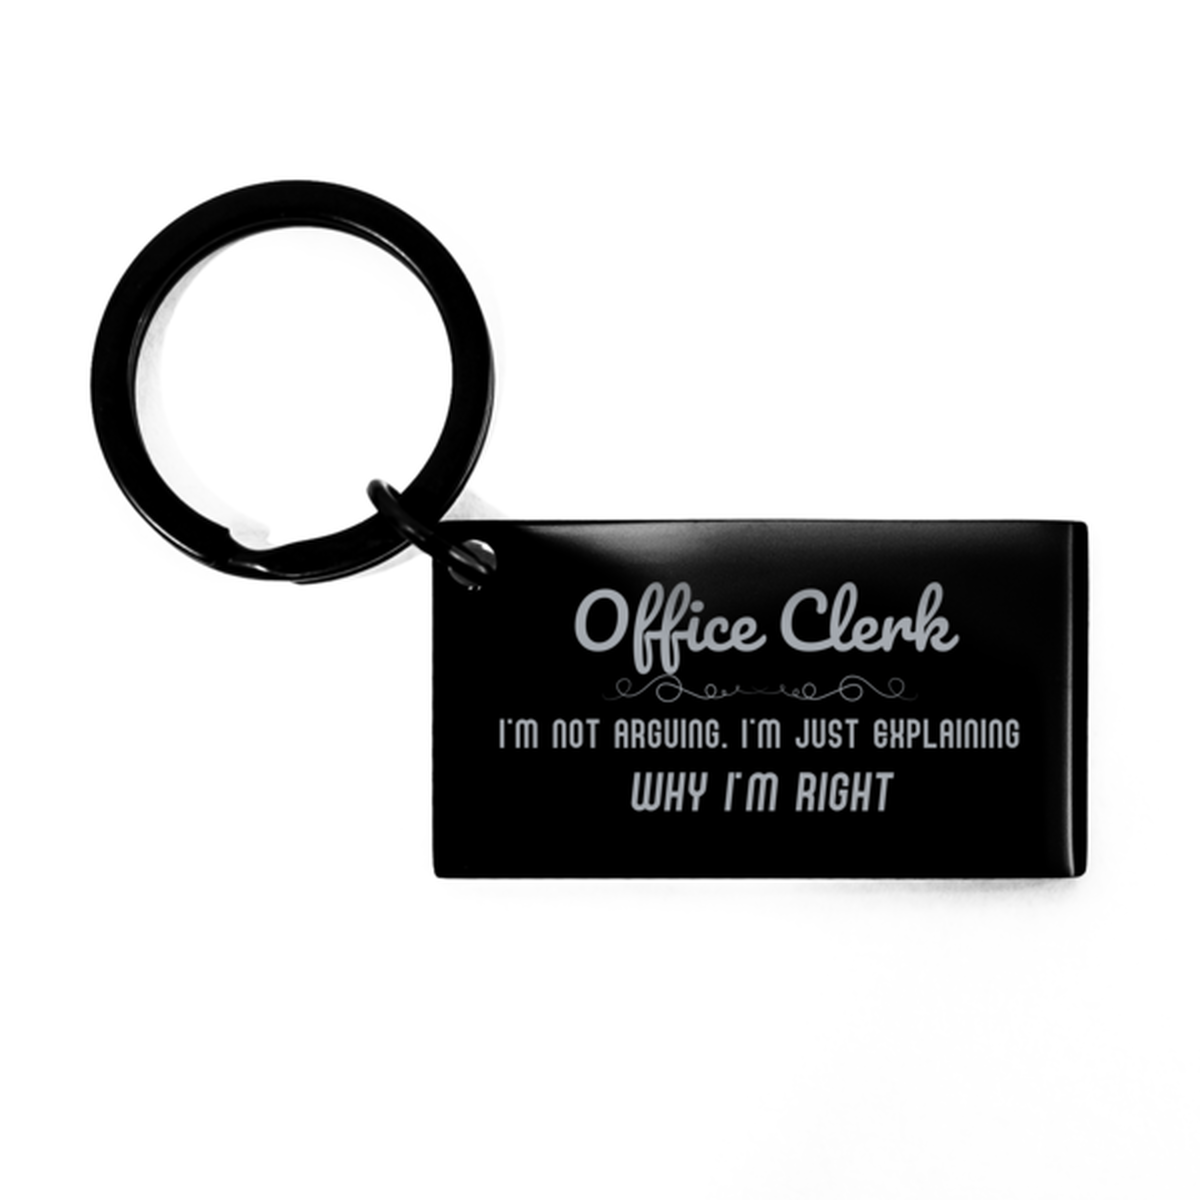 Office Clerk I'm not Arguing. I'm Just Explaining Why I'm RIGHT Keychain, Funny Saying Quote Office Clerk Gifts For Office Clerk Graduation Birthday Christmas Gifts for Men Women Coworker